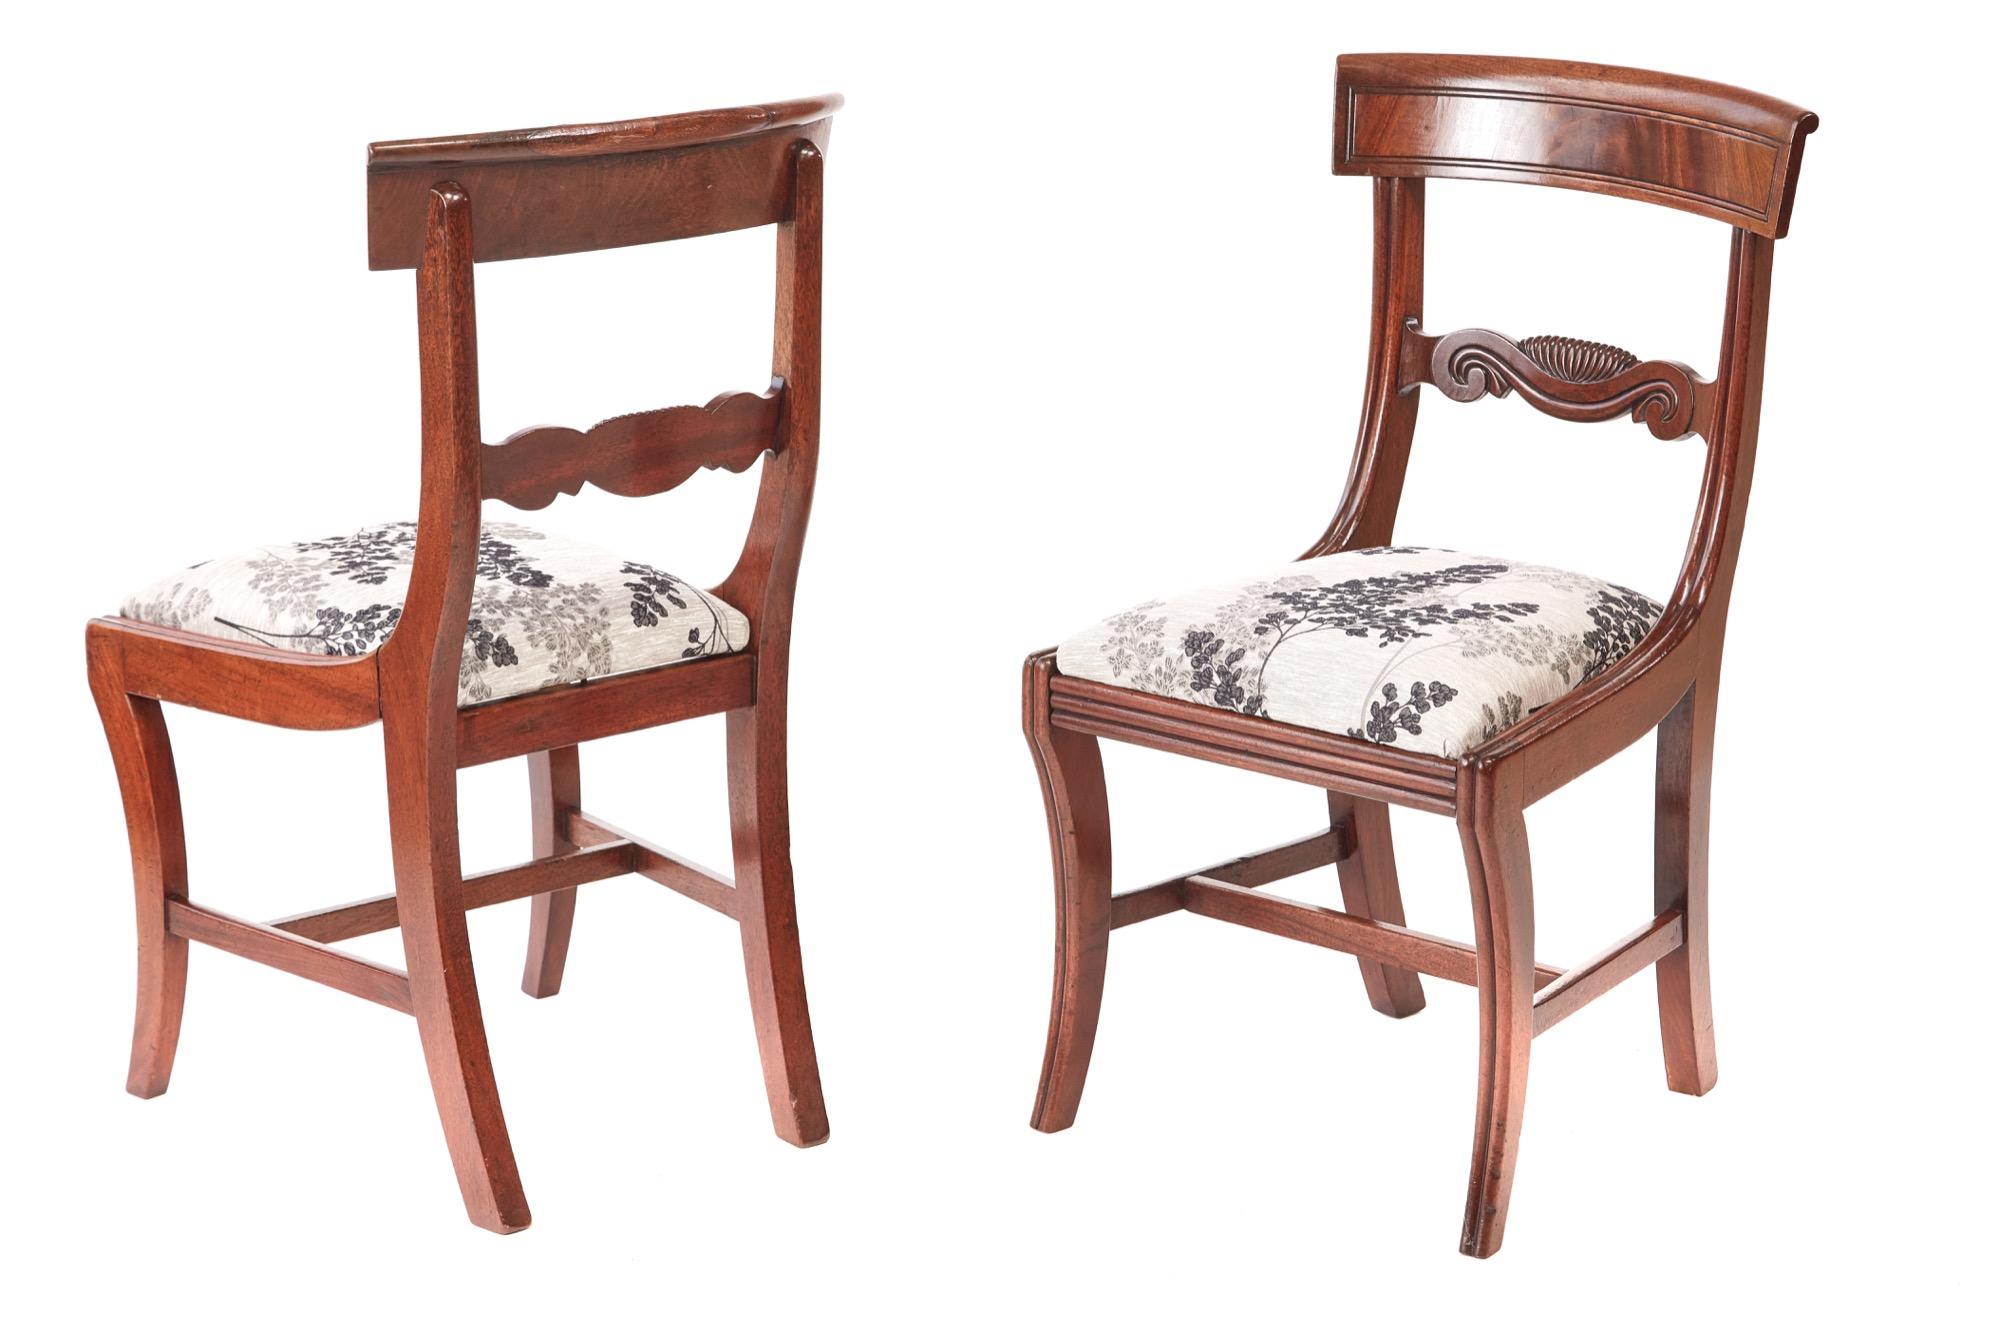 Quality set of four regency mahogany dining chairs,having a flame mahogany top rail with a reeded edge,lovely carved centre rail,newly re-upholstered drop in seats,standing on reeded sabre legs to the front outswept back legs united by mahogany